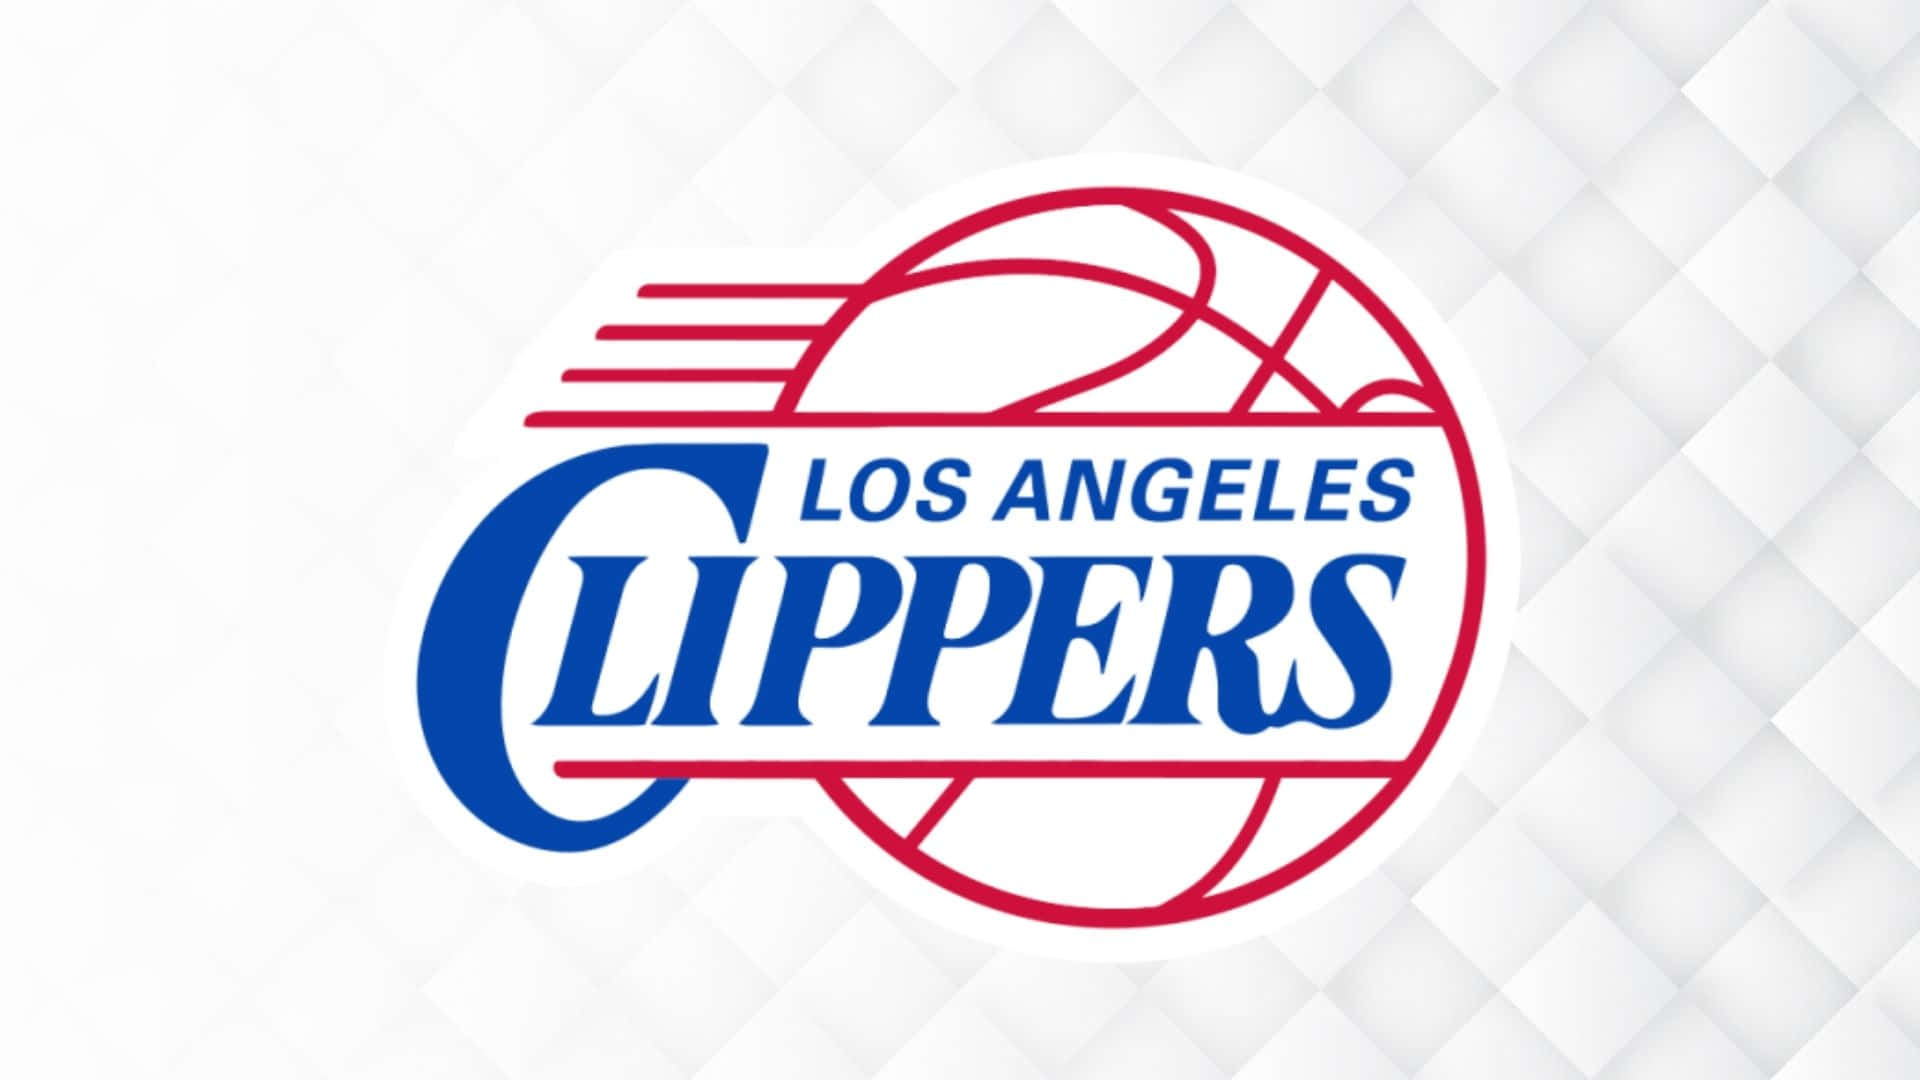 The Los Angeles Clippers Take the Court Wallpaper